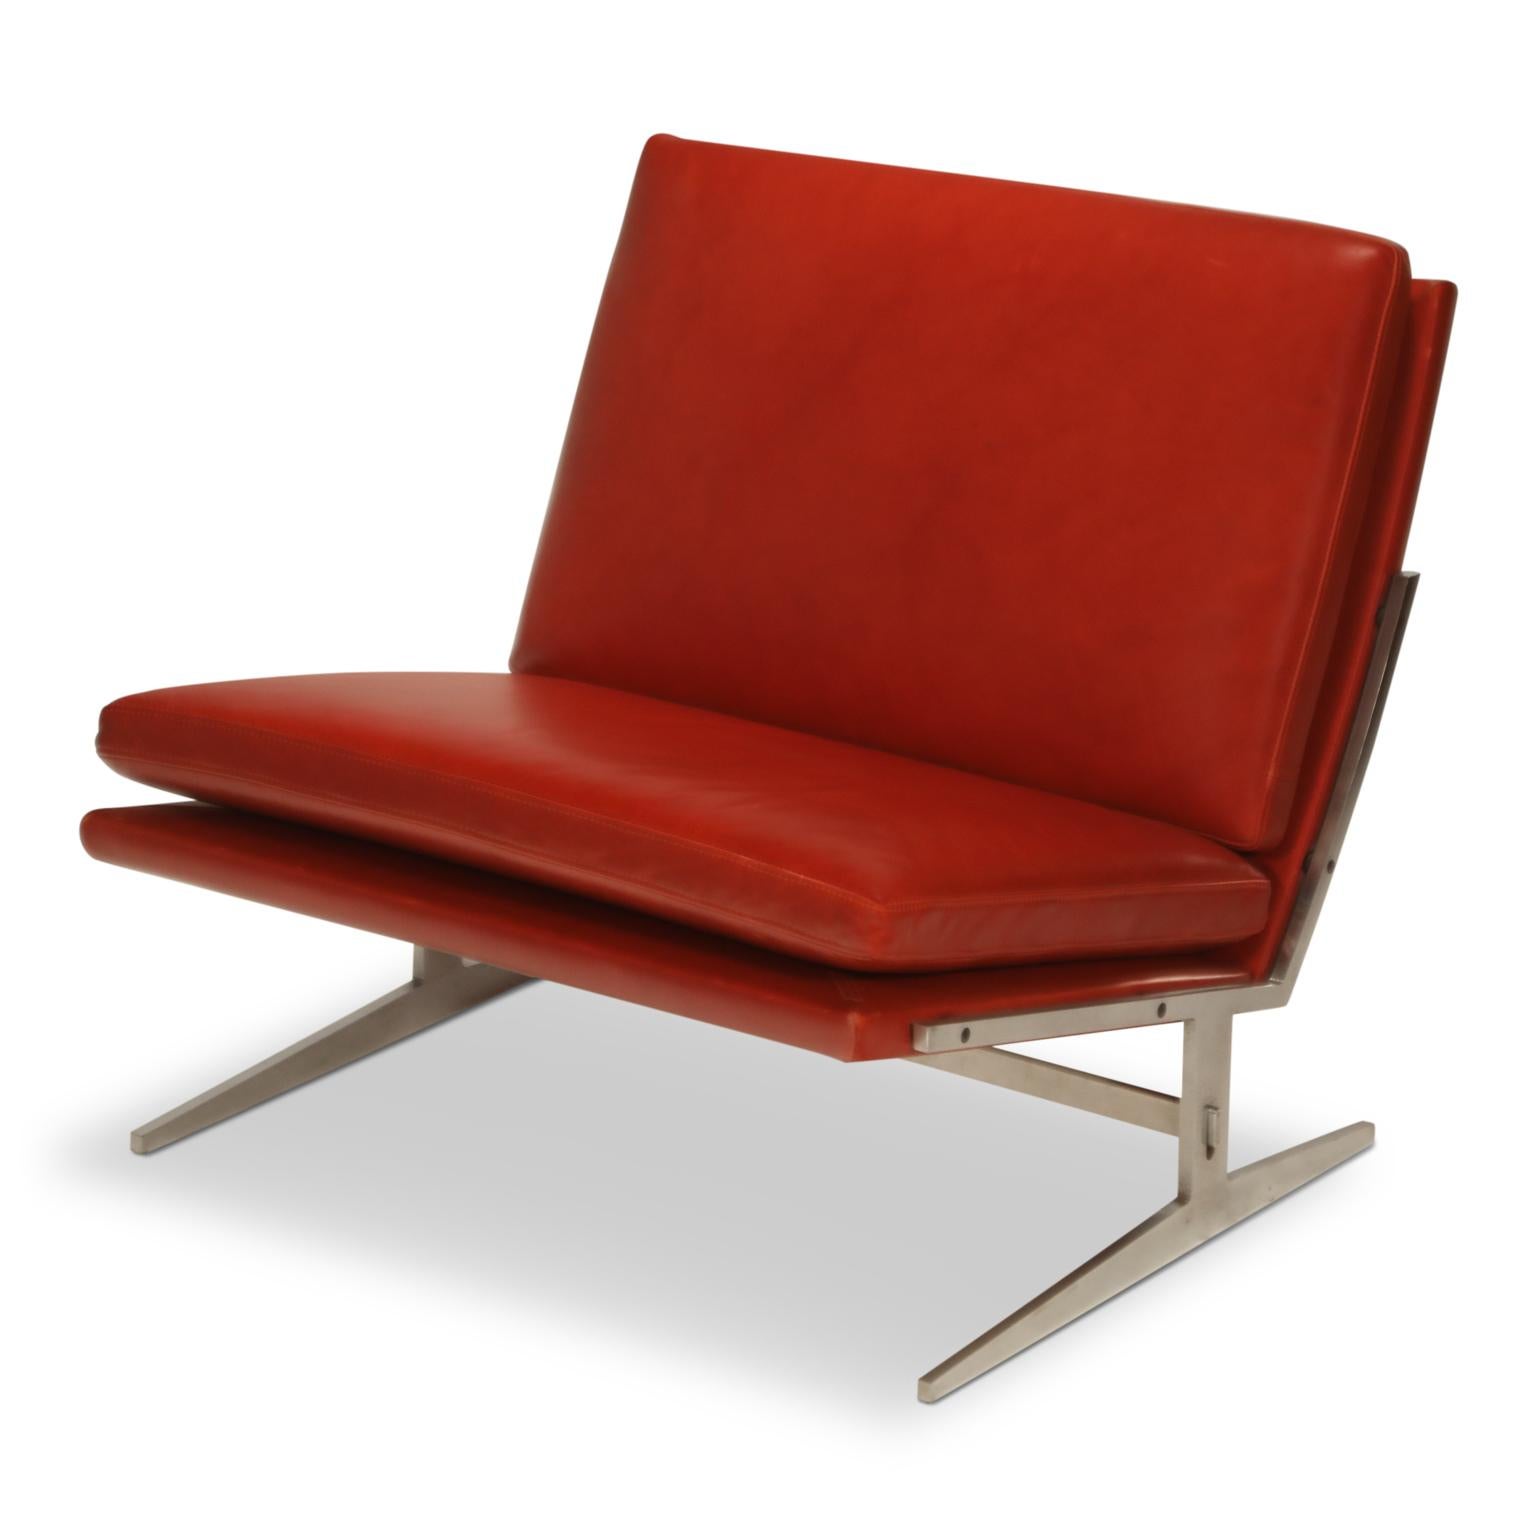 Mid-20th Century BO-561 Lounge Chairs by Preben Fabricius and Jørgen Kastholm for Bo-Ex, 1962